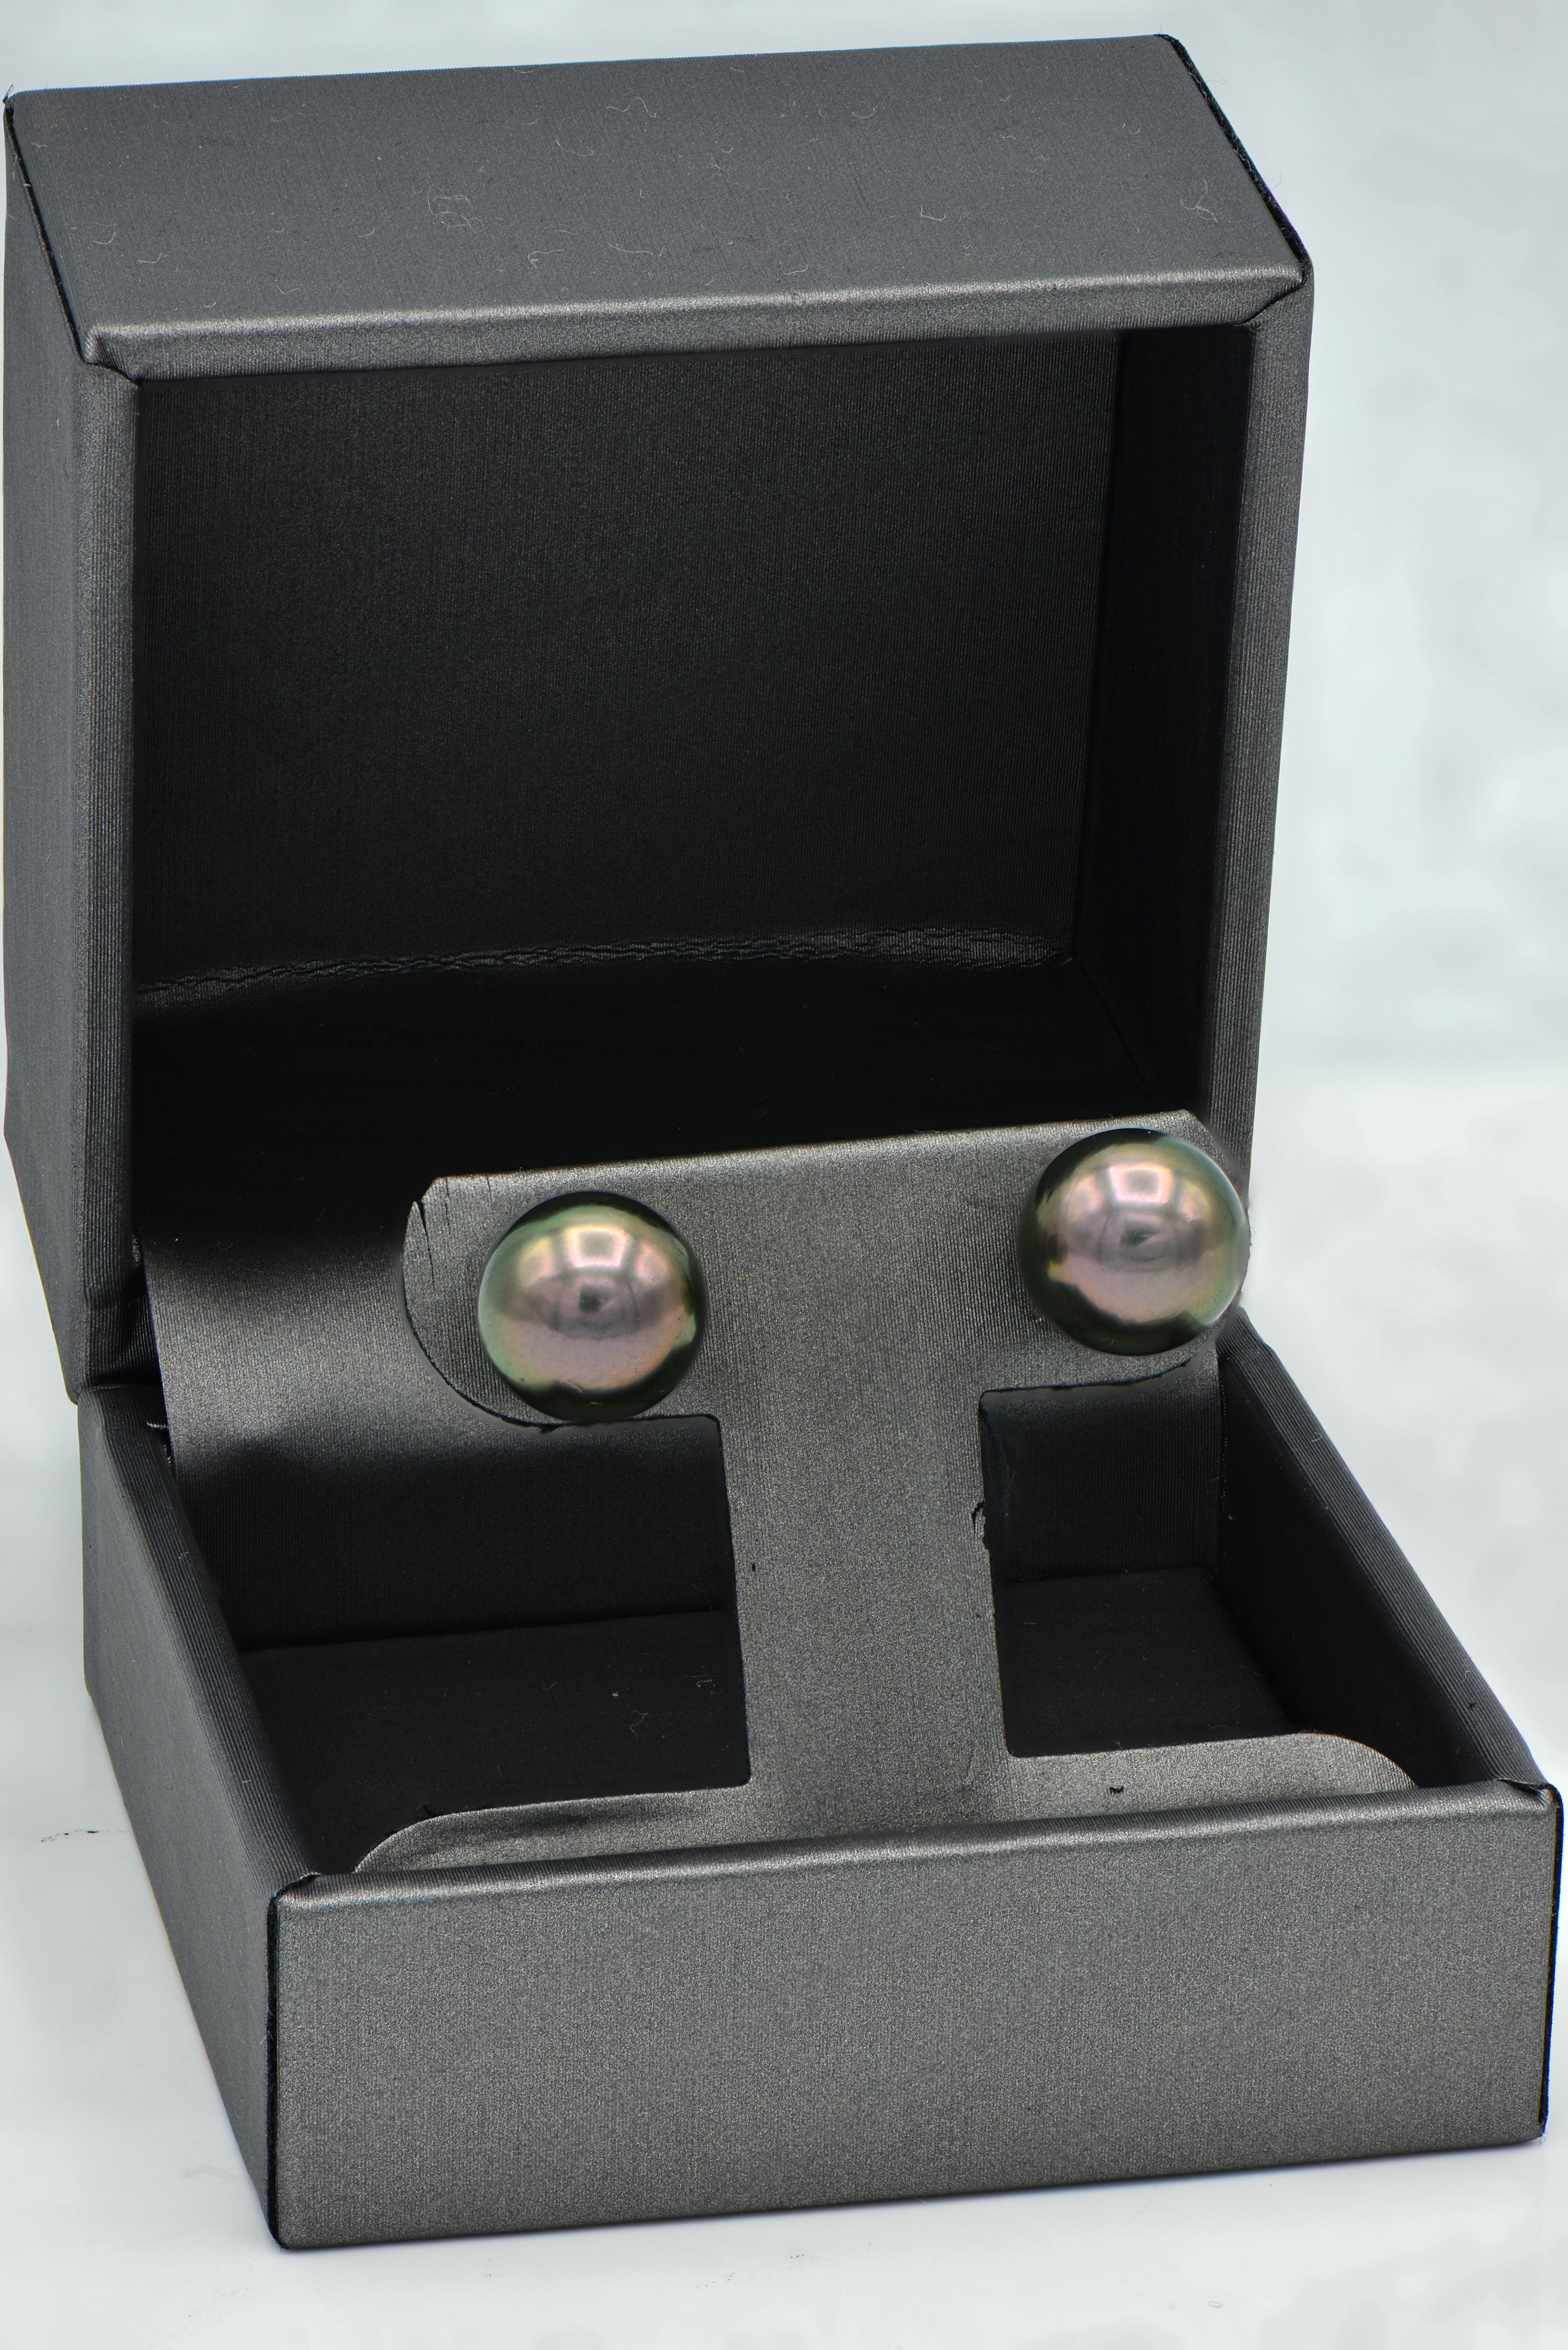 Tahitian Pearl Studs give a little twist to the classic white pearl studs. The Tahitian Pearl Studs are expertly matched in color, luster, and size to make a perfect pair. These 9-9.5mm beautiful pearls are set in 14 karat white gold.